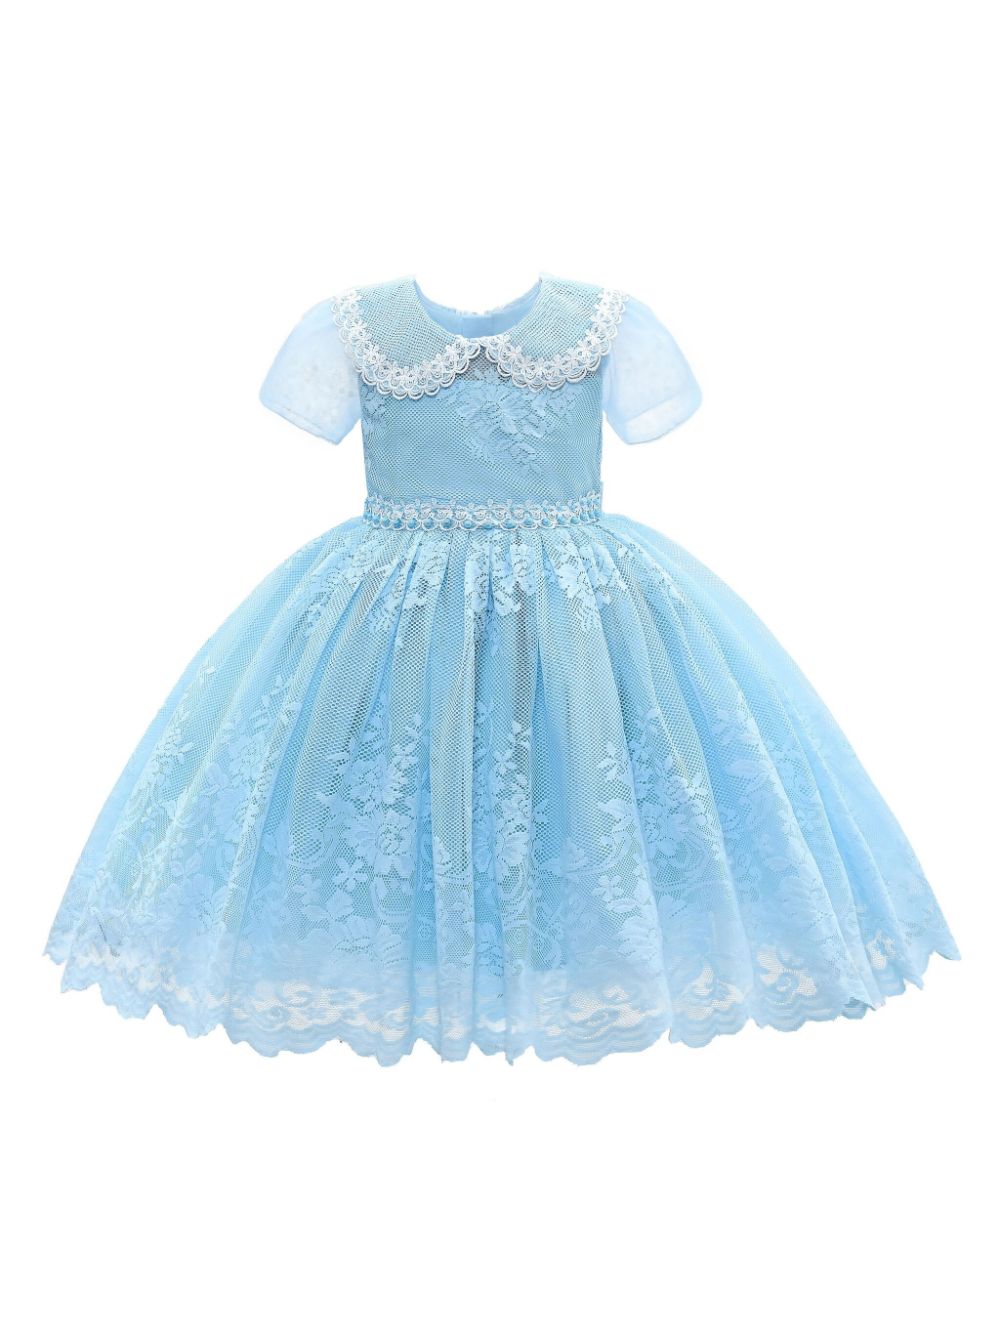 Tulleen Dolly lace-embroidery dress - Blue von Tulleen